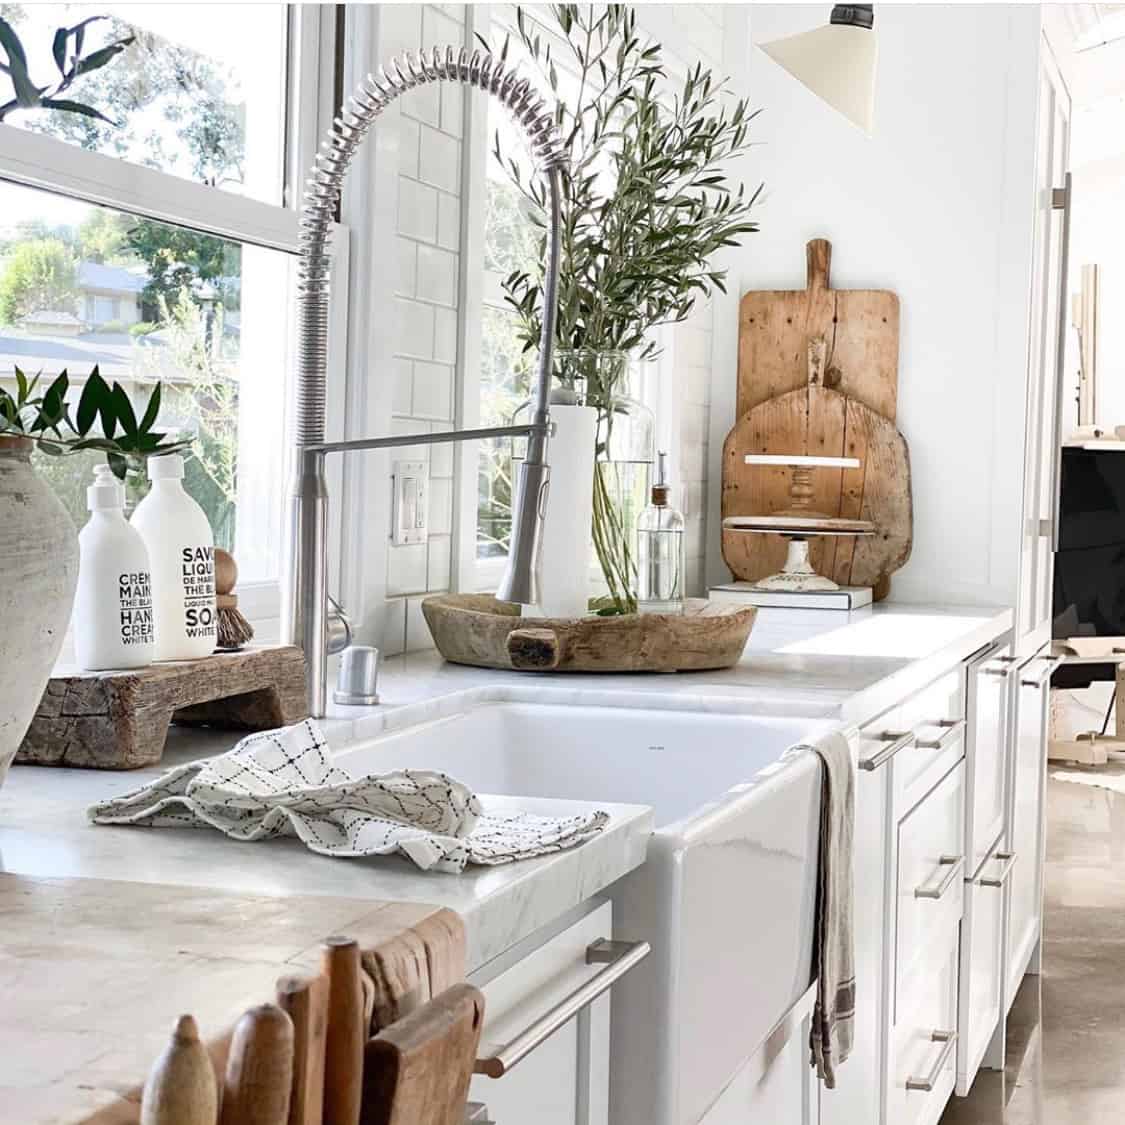 White kitchen with antique bread boards and dough bowls on display and a vase of olive branches